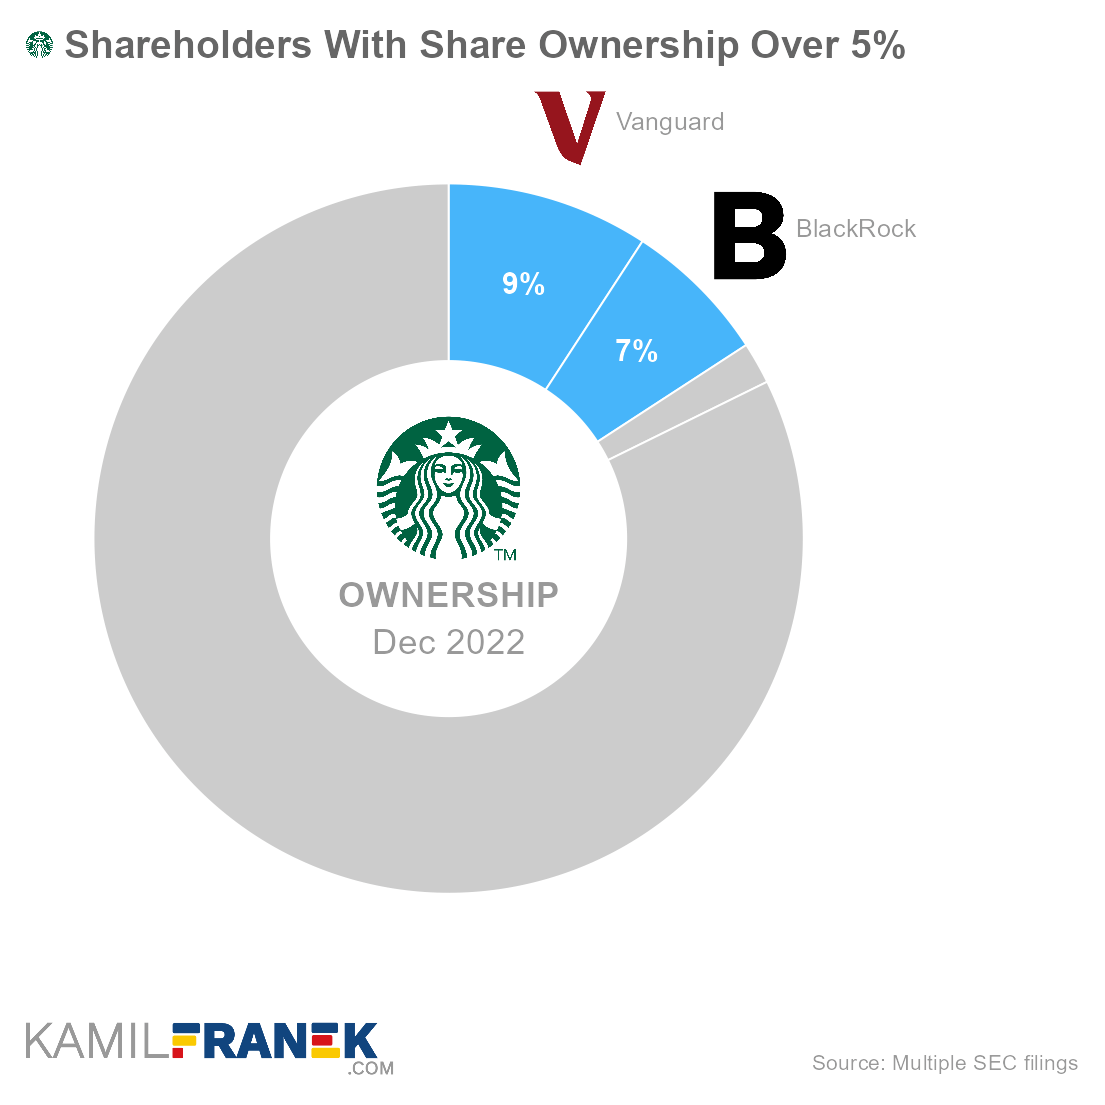 Starbucks largest shareholders by share ownership and vote control (donut chart)